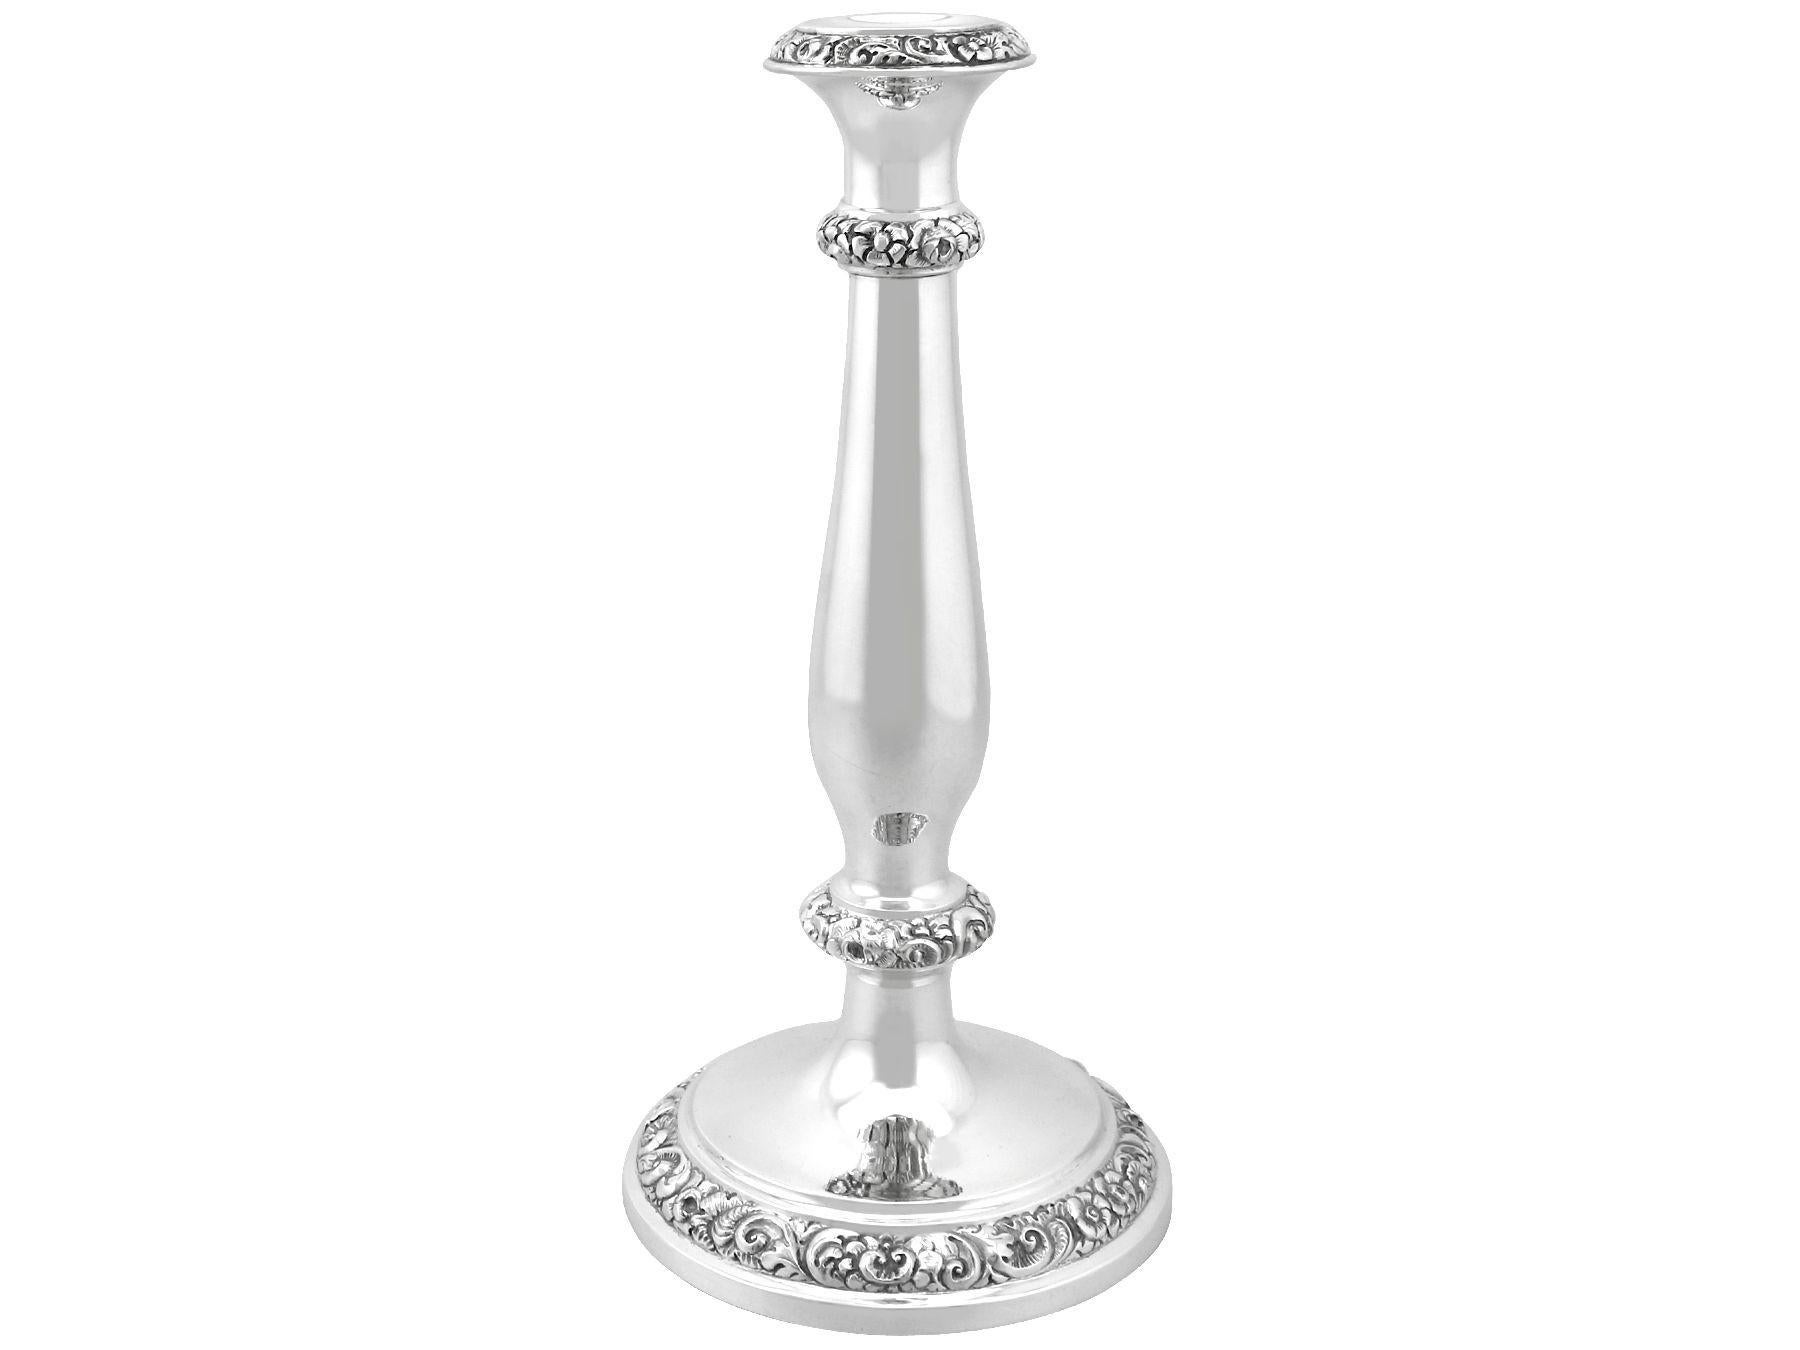 Antique Austrian Silver Candle Holders For Sale 1